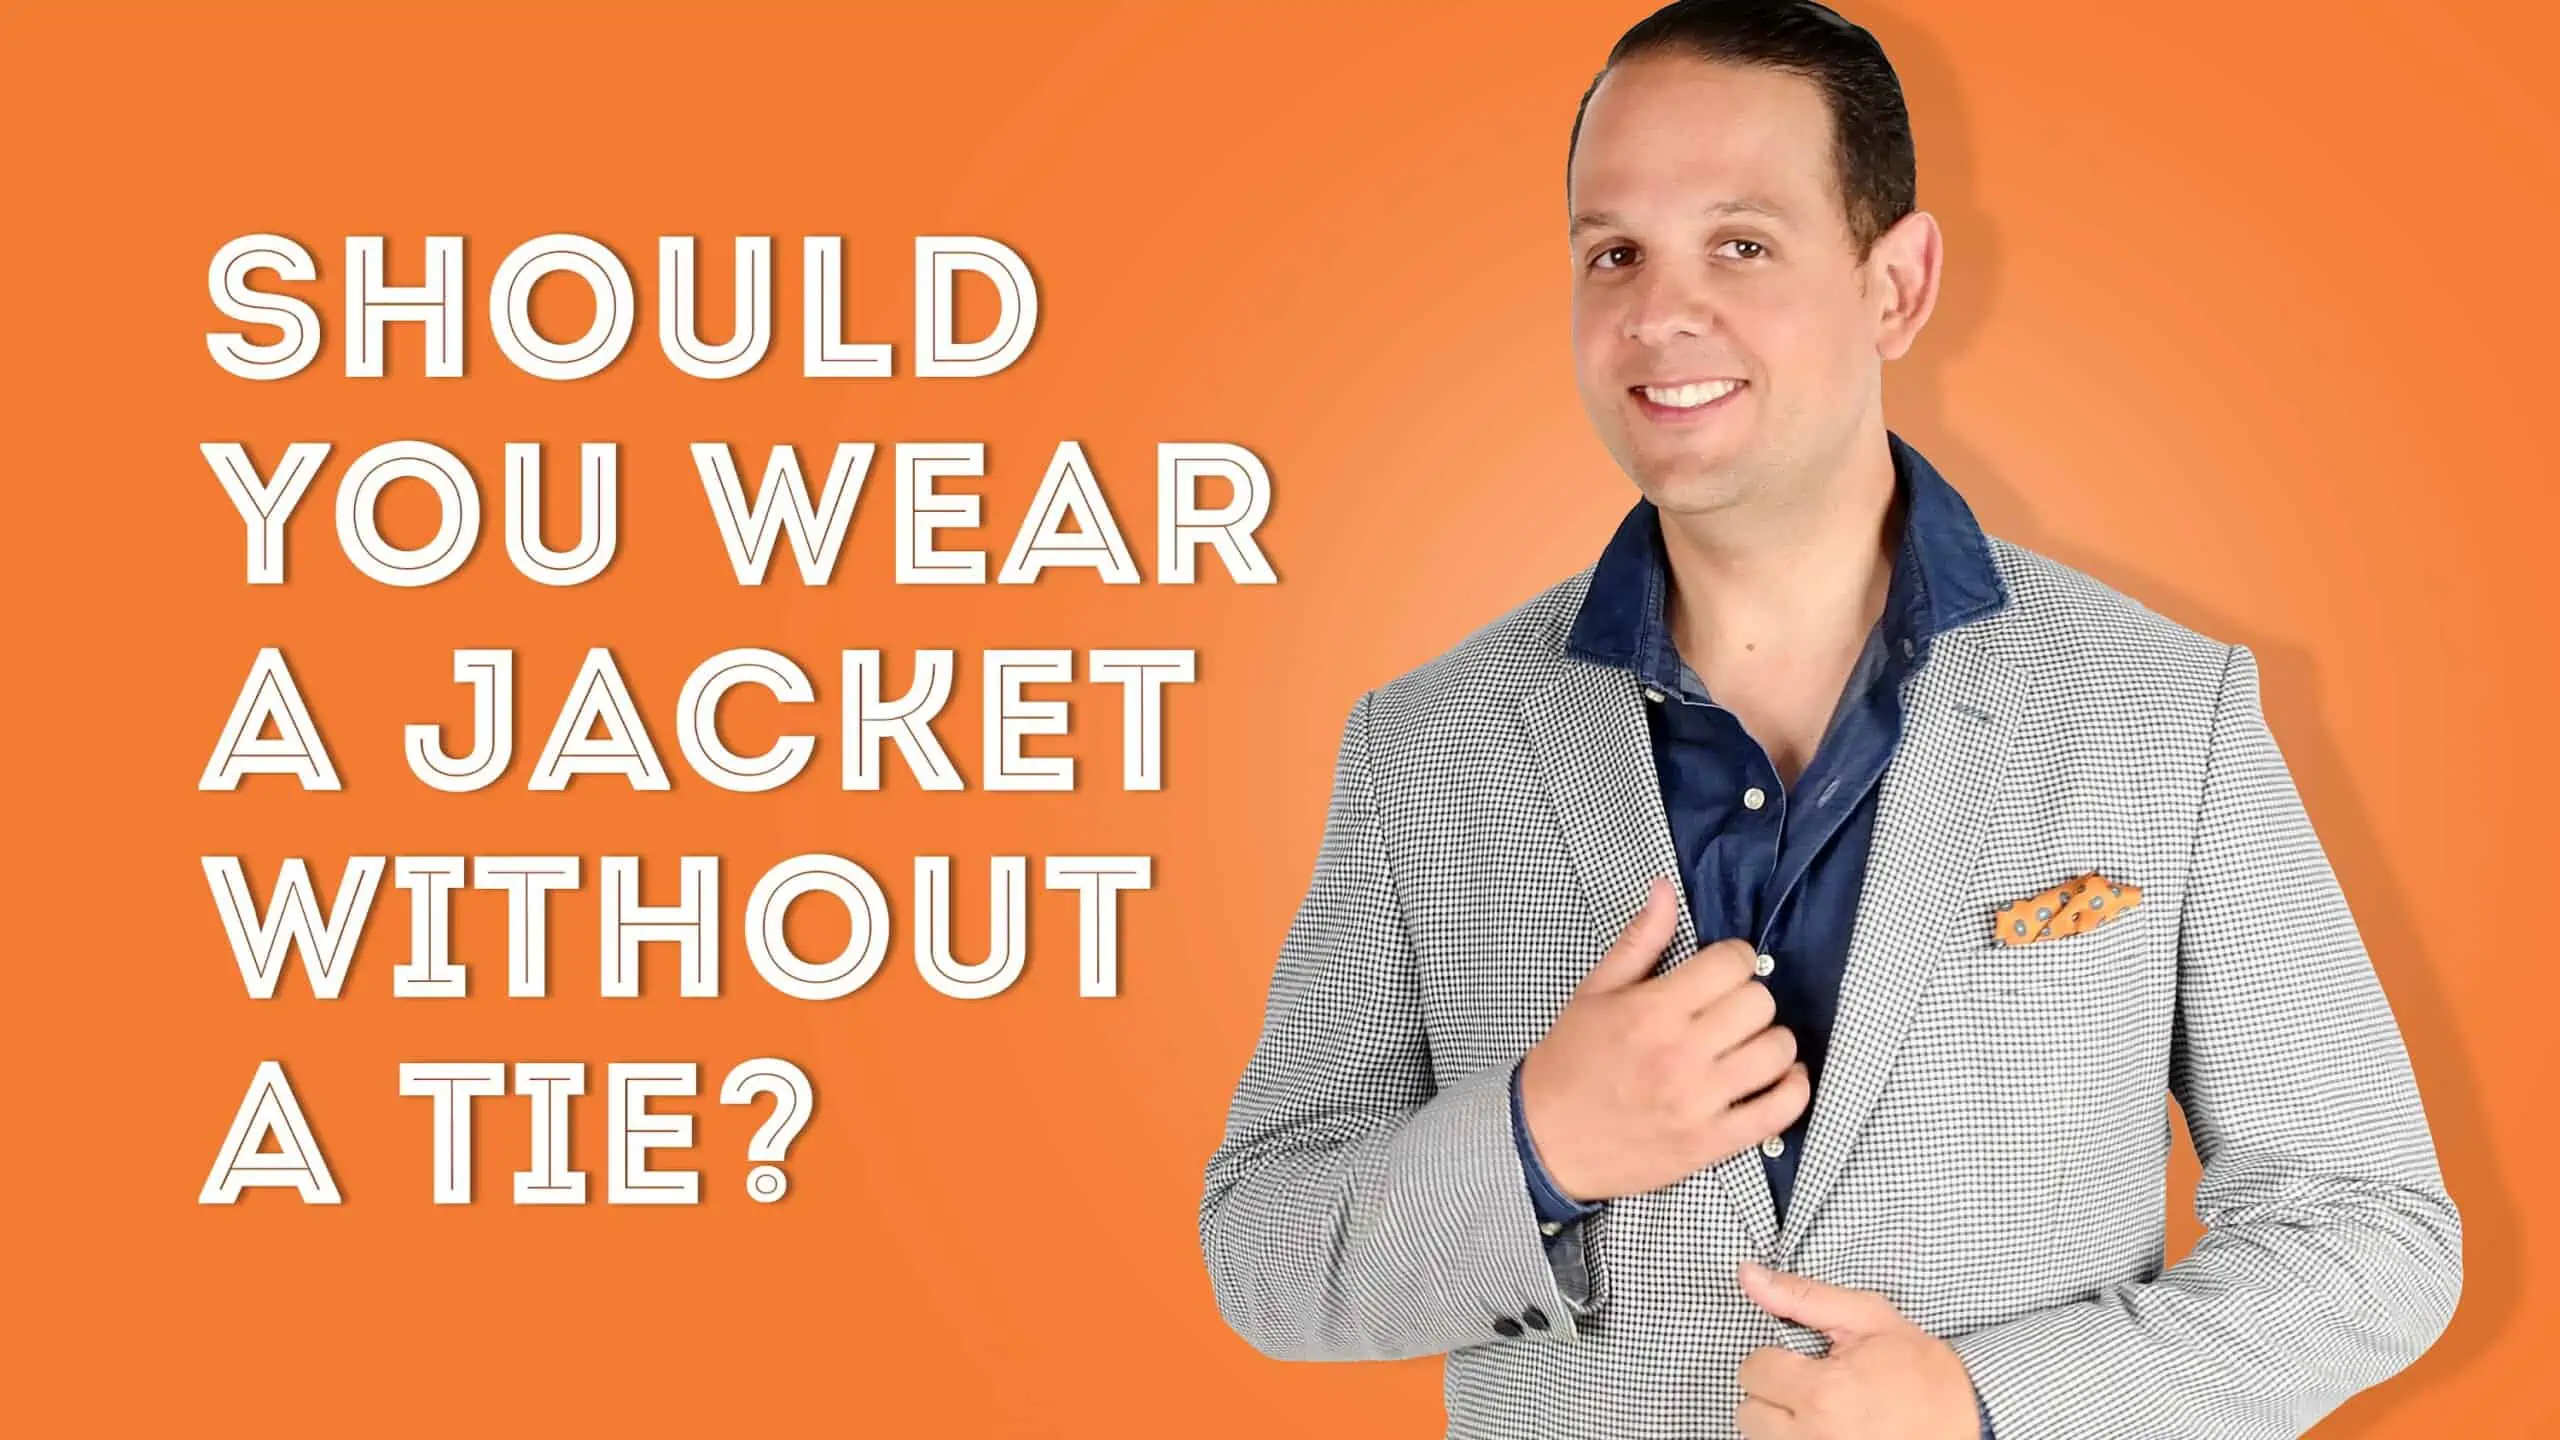 Guide to Suit Alterations - Considerations for Jackets - Joe Button